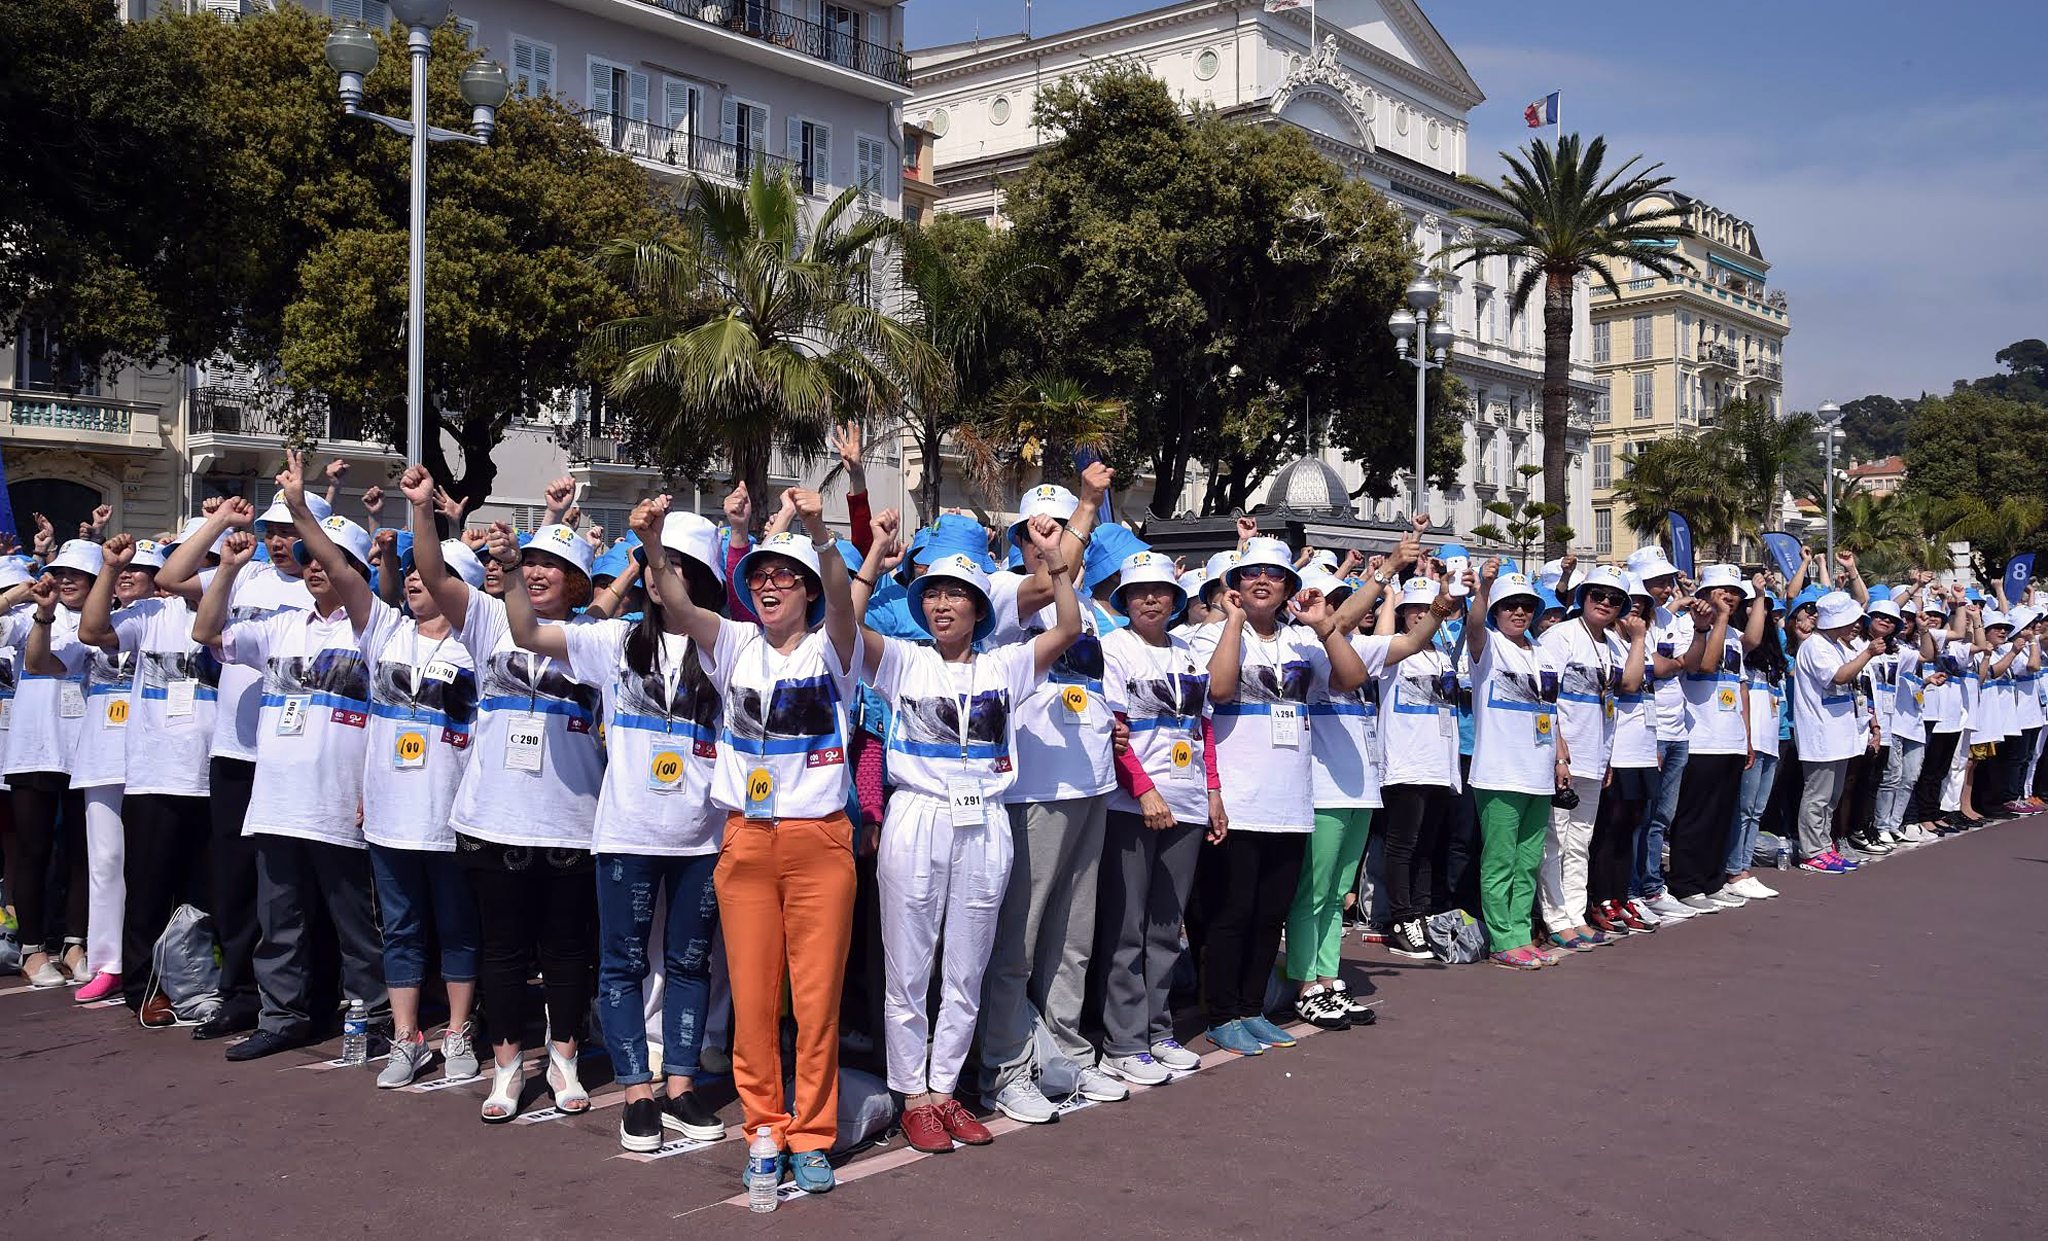 PHOTO: Employees of Chinese company 'Tiens' attend a parade on the Promenade des Anglais in Nice, southeastern France, May 8, 2015.